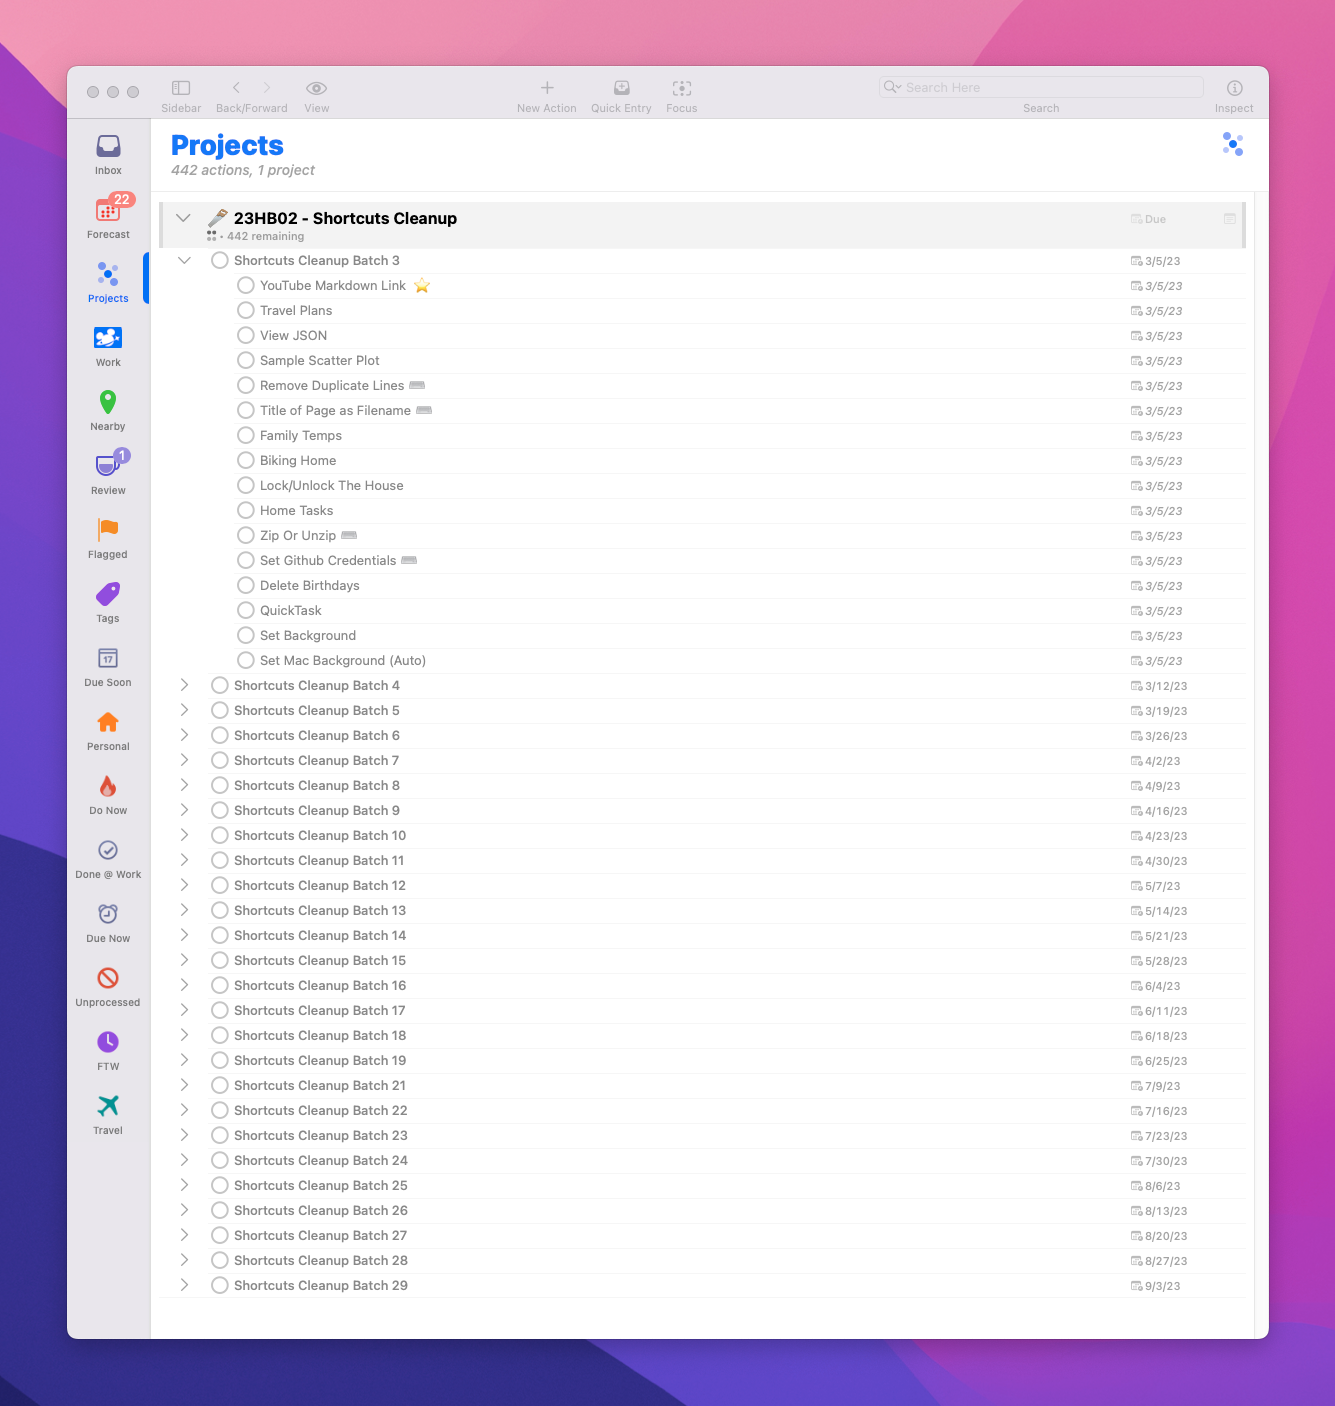 Screenshot of the Shortcuts Cleanup Omnifocus Project